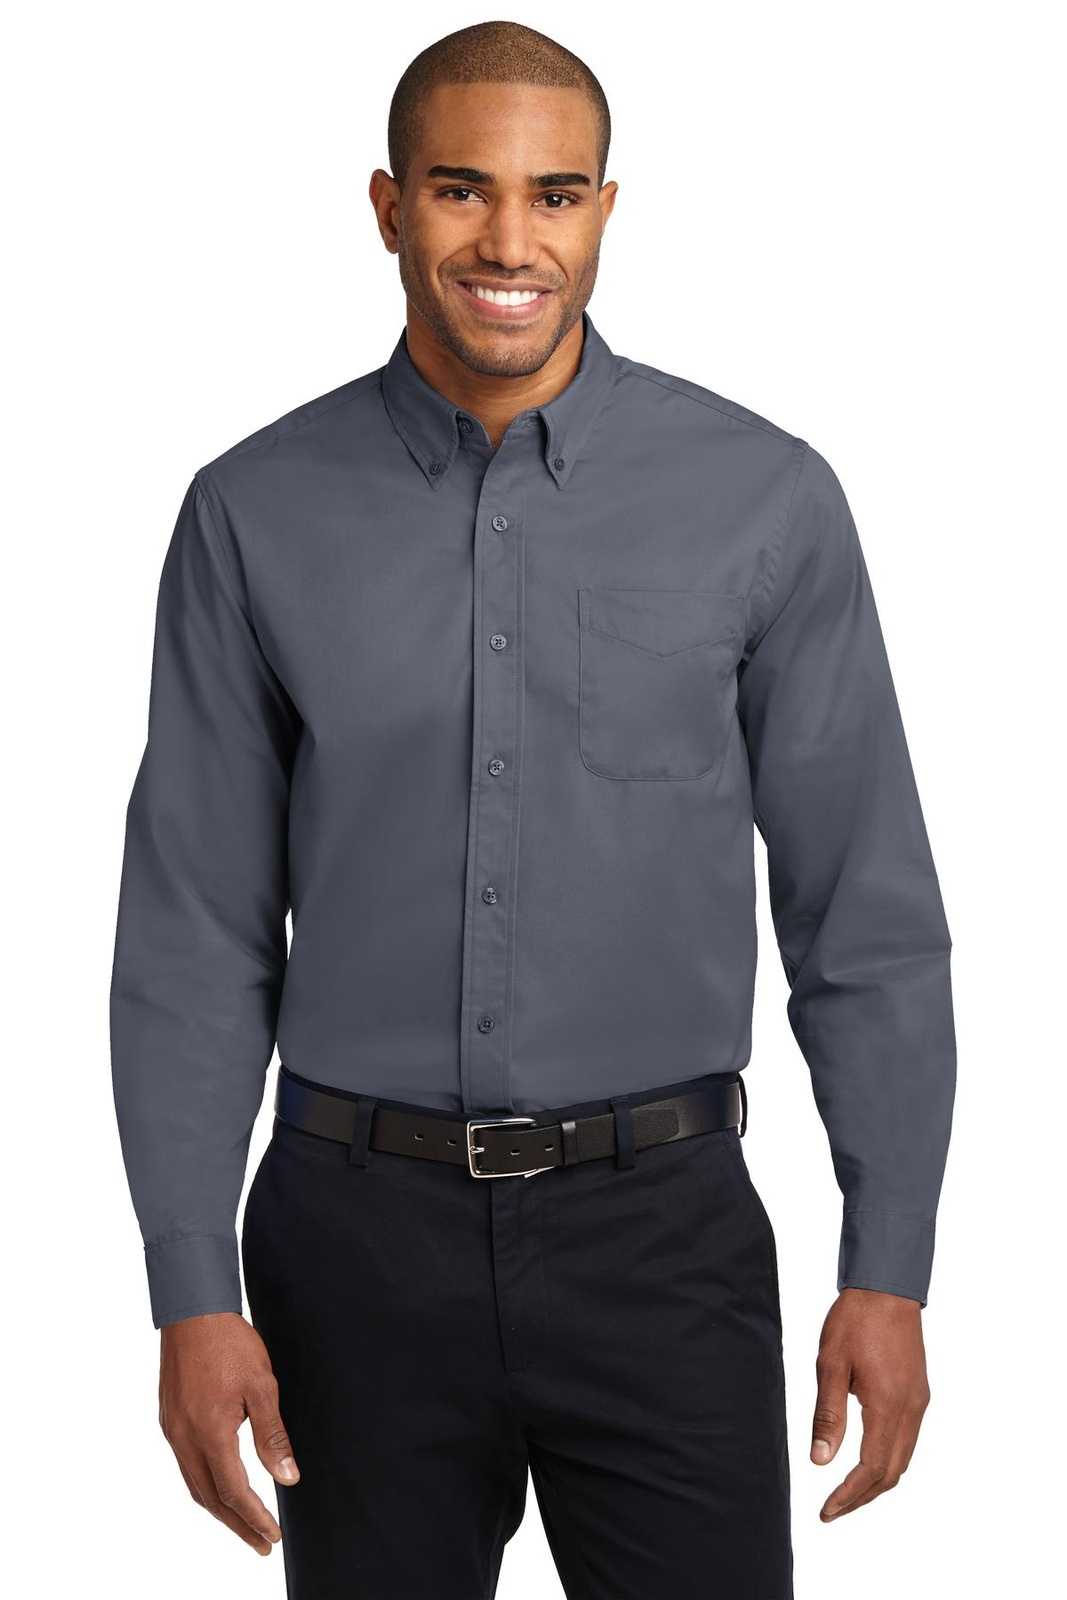 Port Authority S608 Long Sleeve Easy Care Shirt - Steel Gray Light Stone - HIT a Double - 1